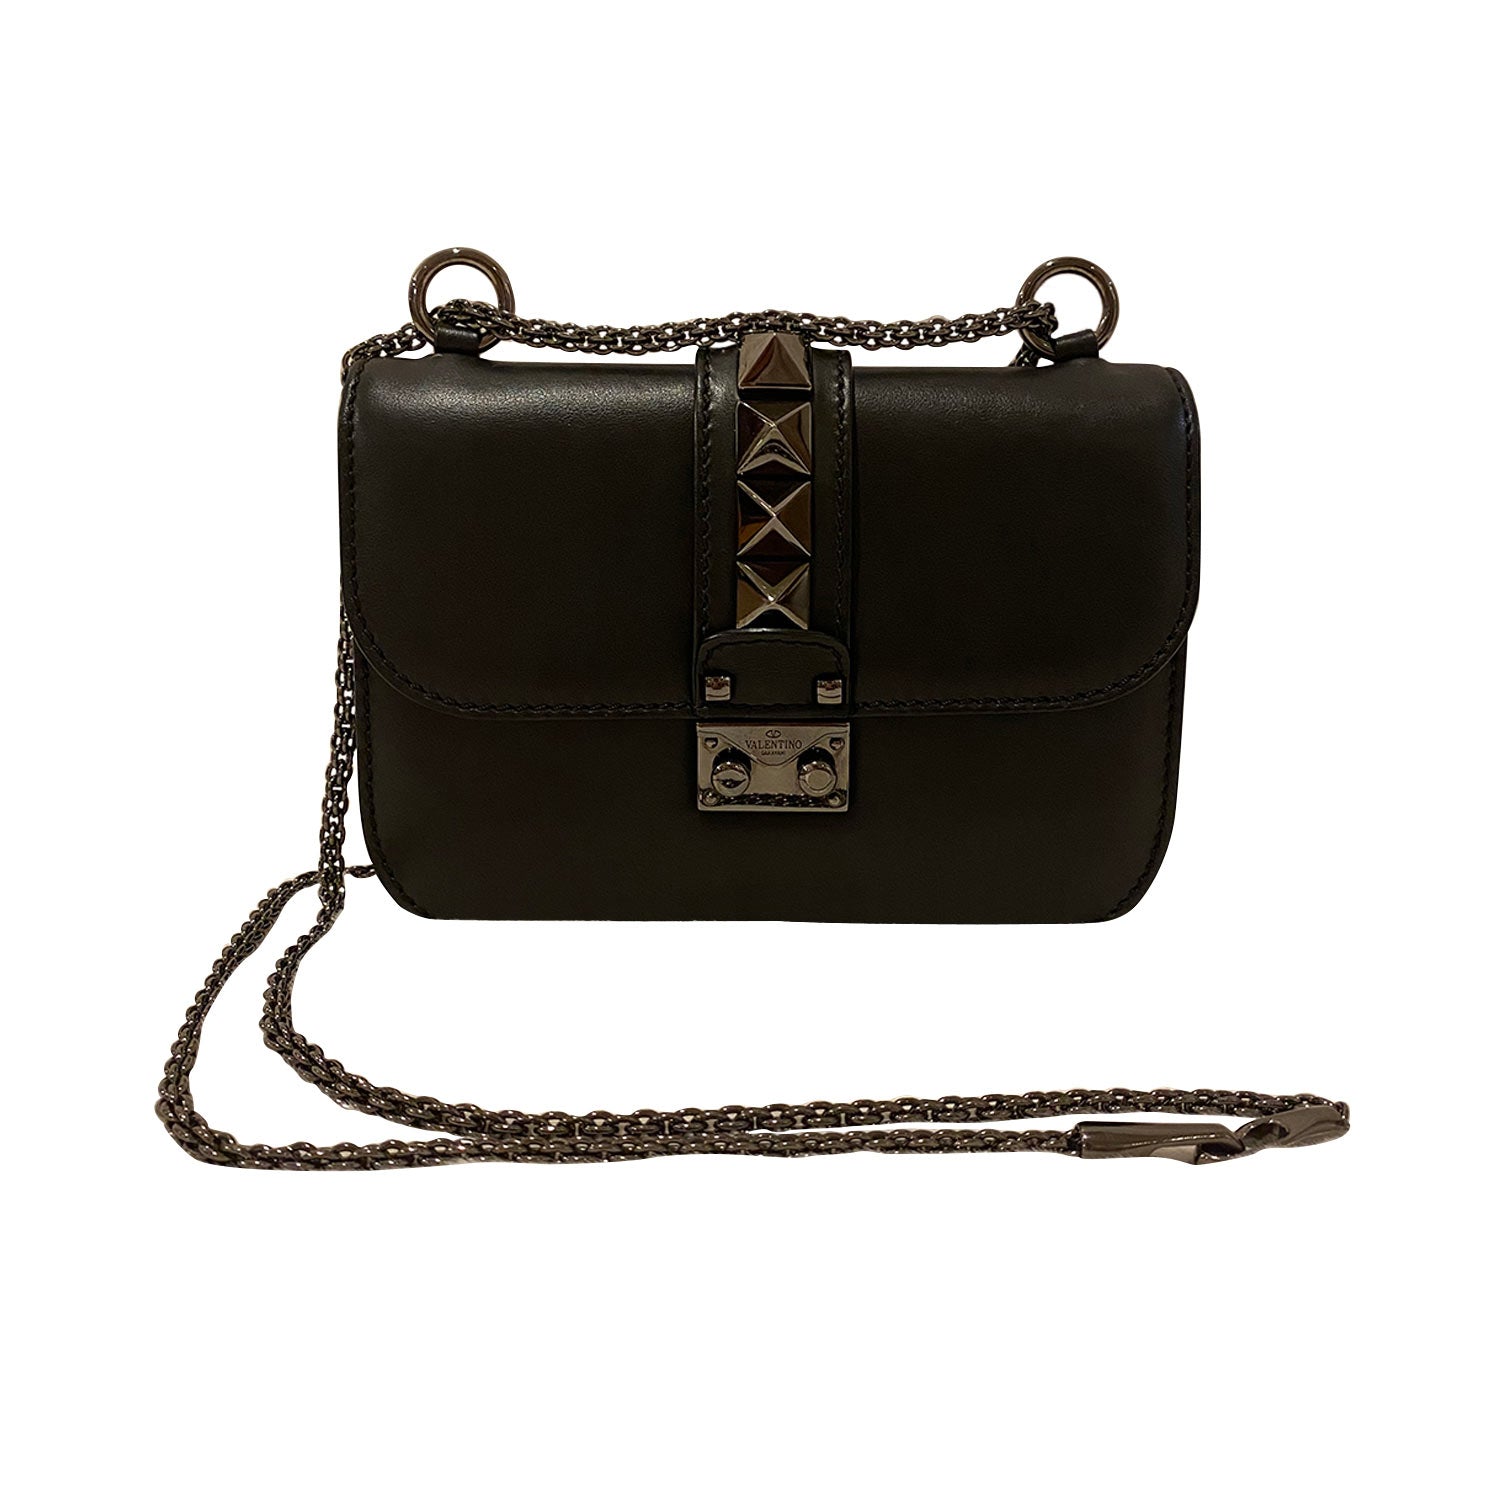 Shop authentic Small Glam Lock Noir Crossbody Bag at revogue for just USD 1,300.00